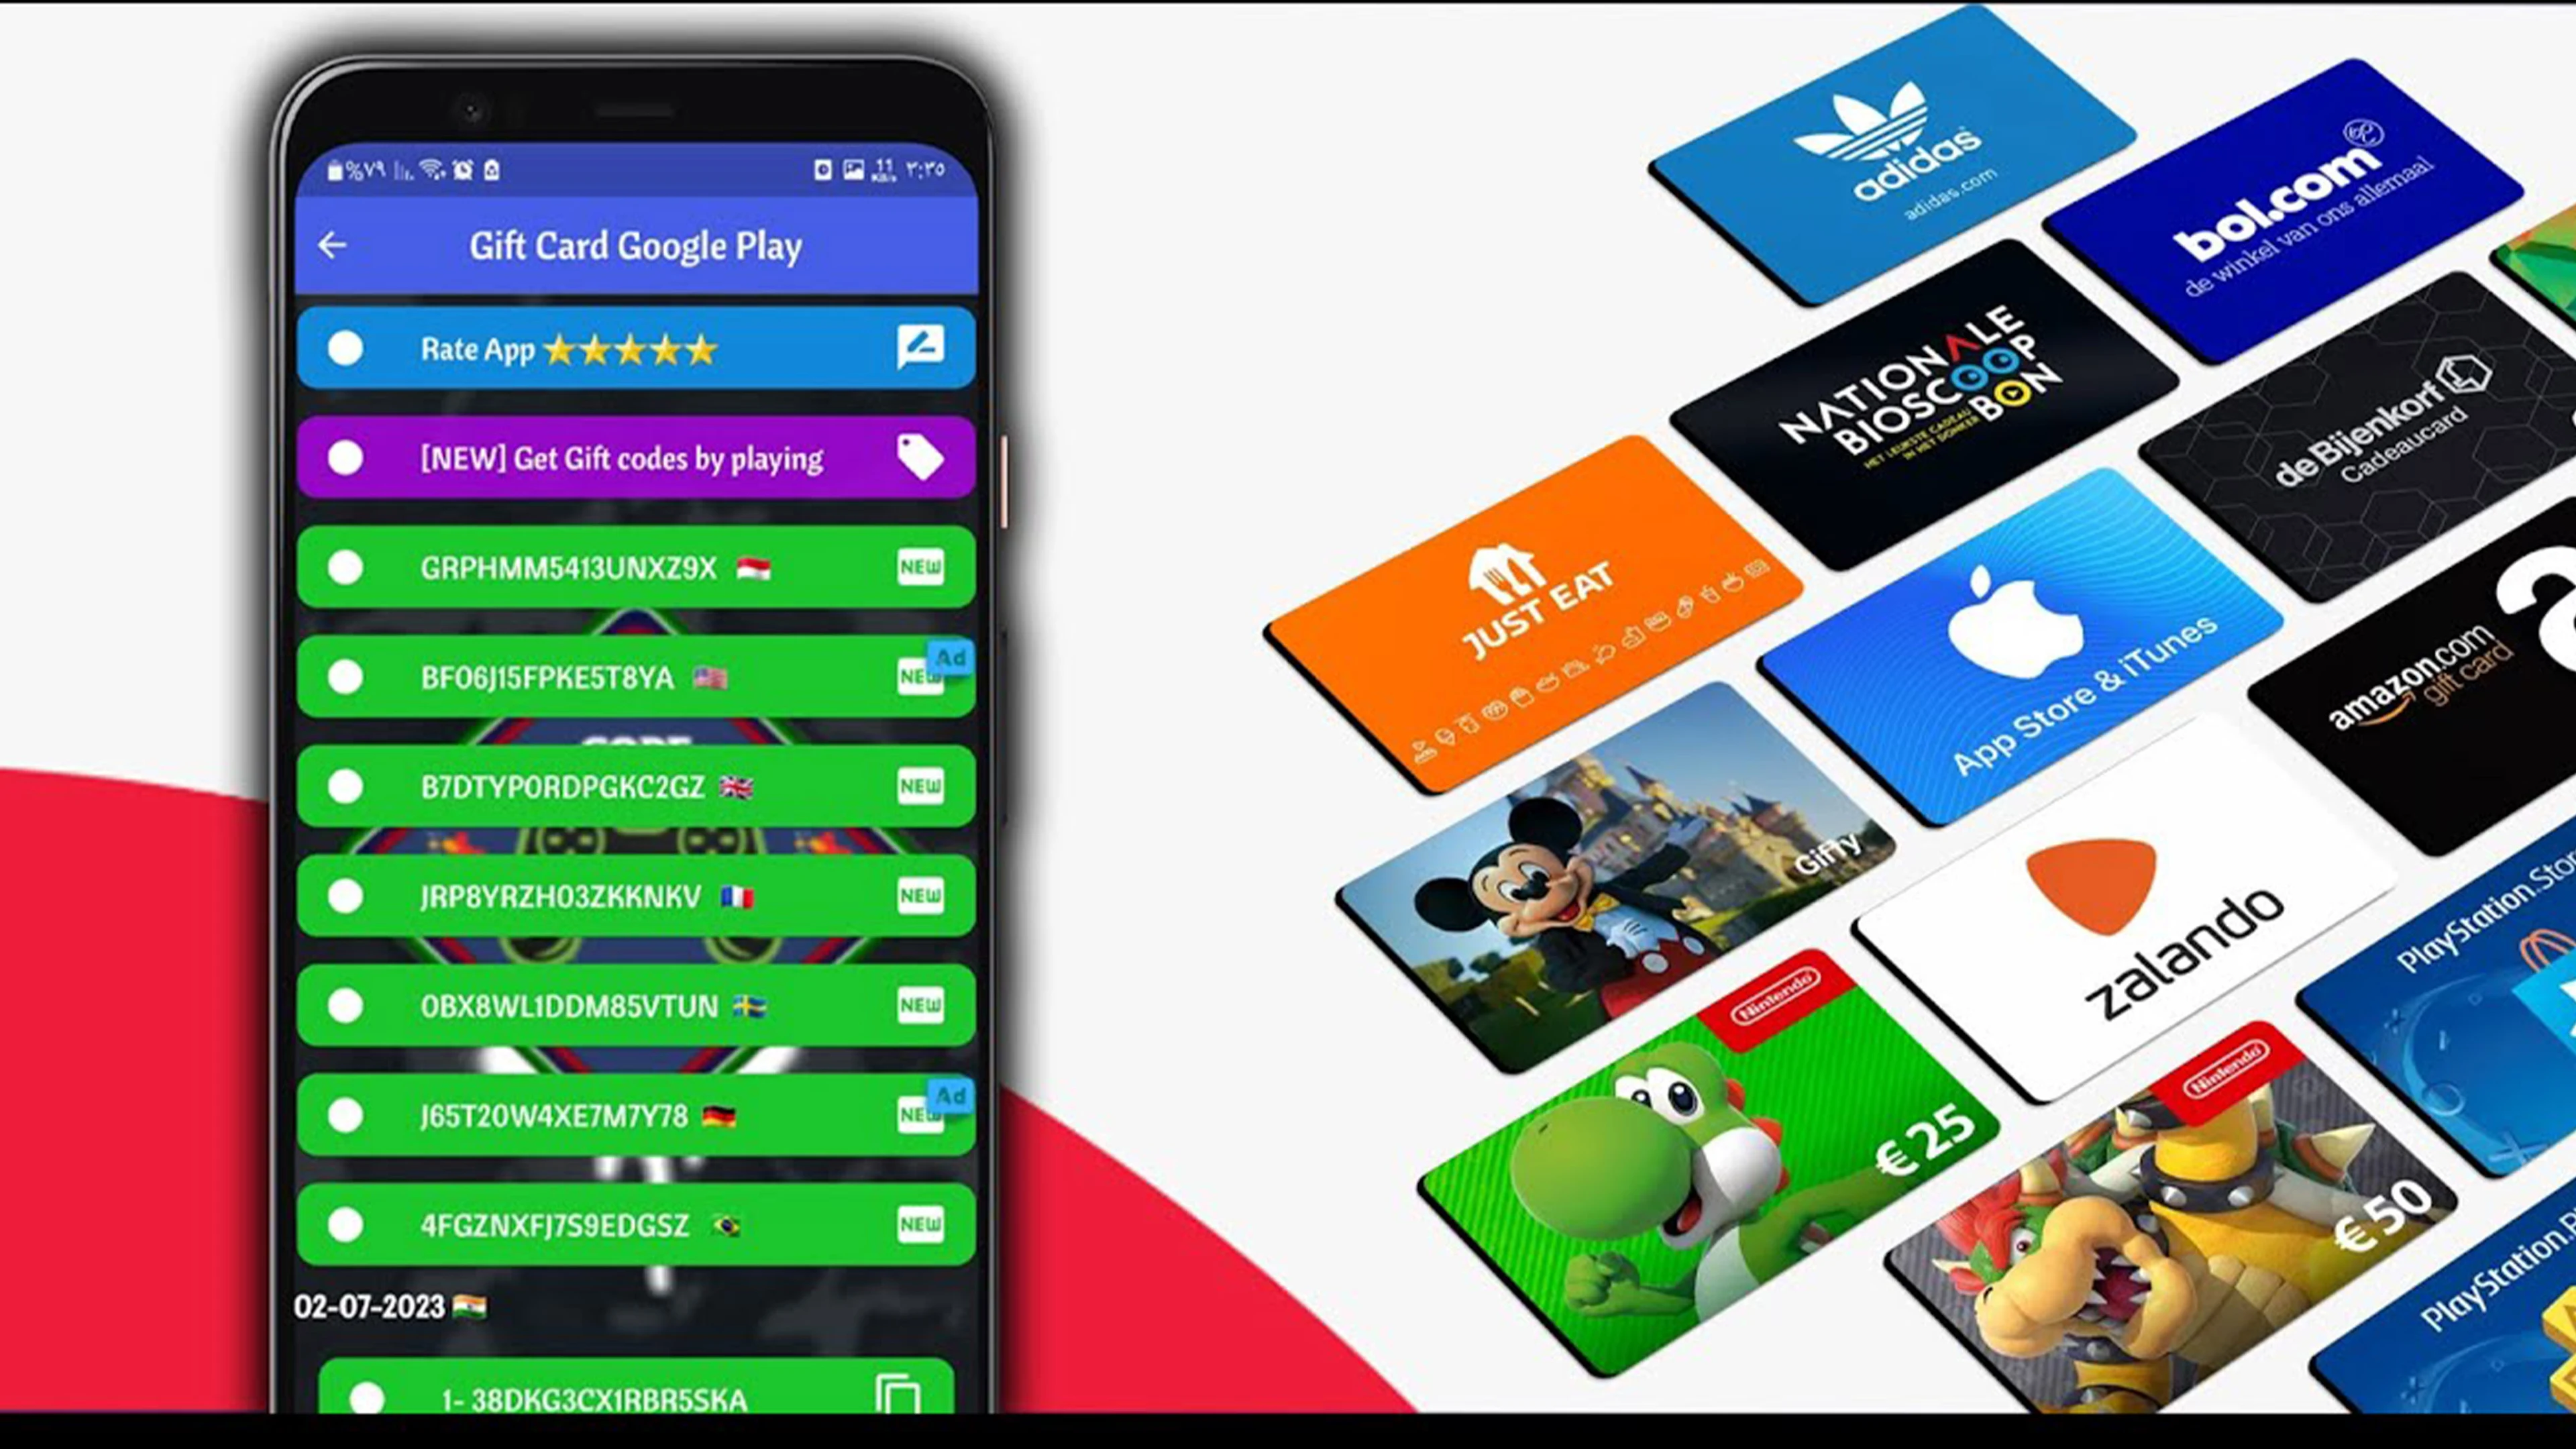 2023 Free Google Play Redeem Codes India by Playing Games